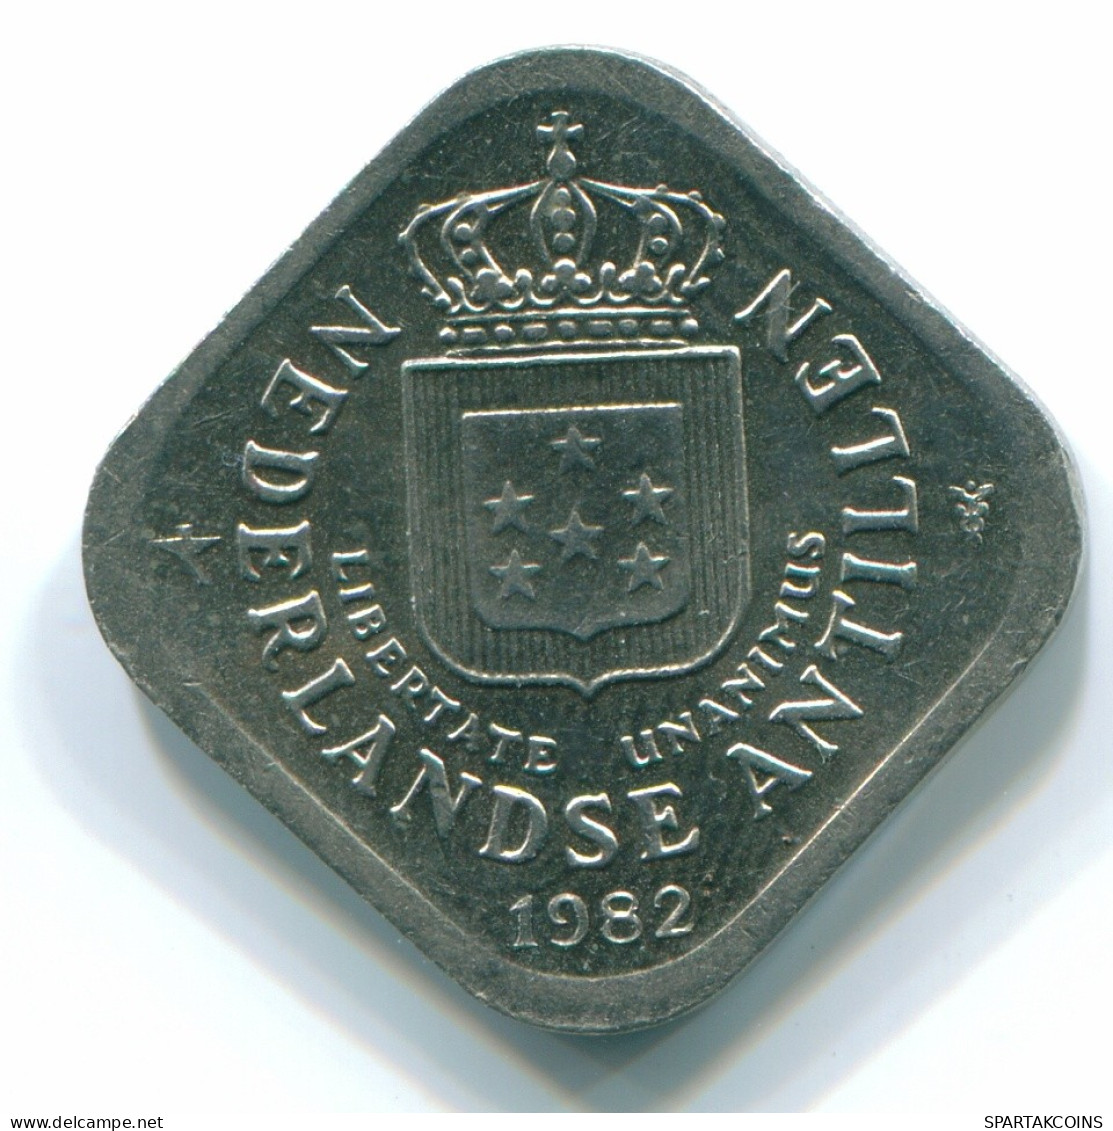 5 CENTS 1982 NETHERLANDS ANTILLES Nickel Colonial Coin #S12351.U.A - Netherlands Antilles